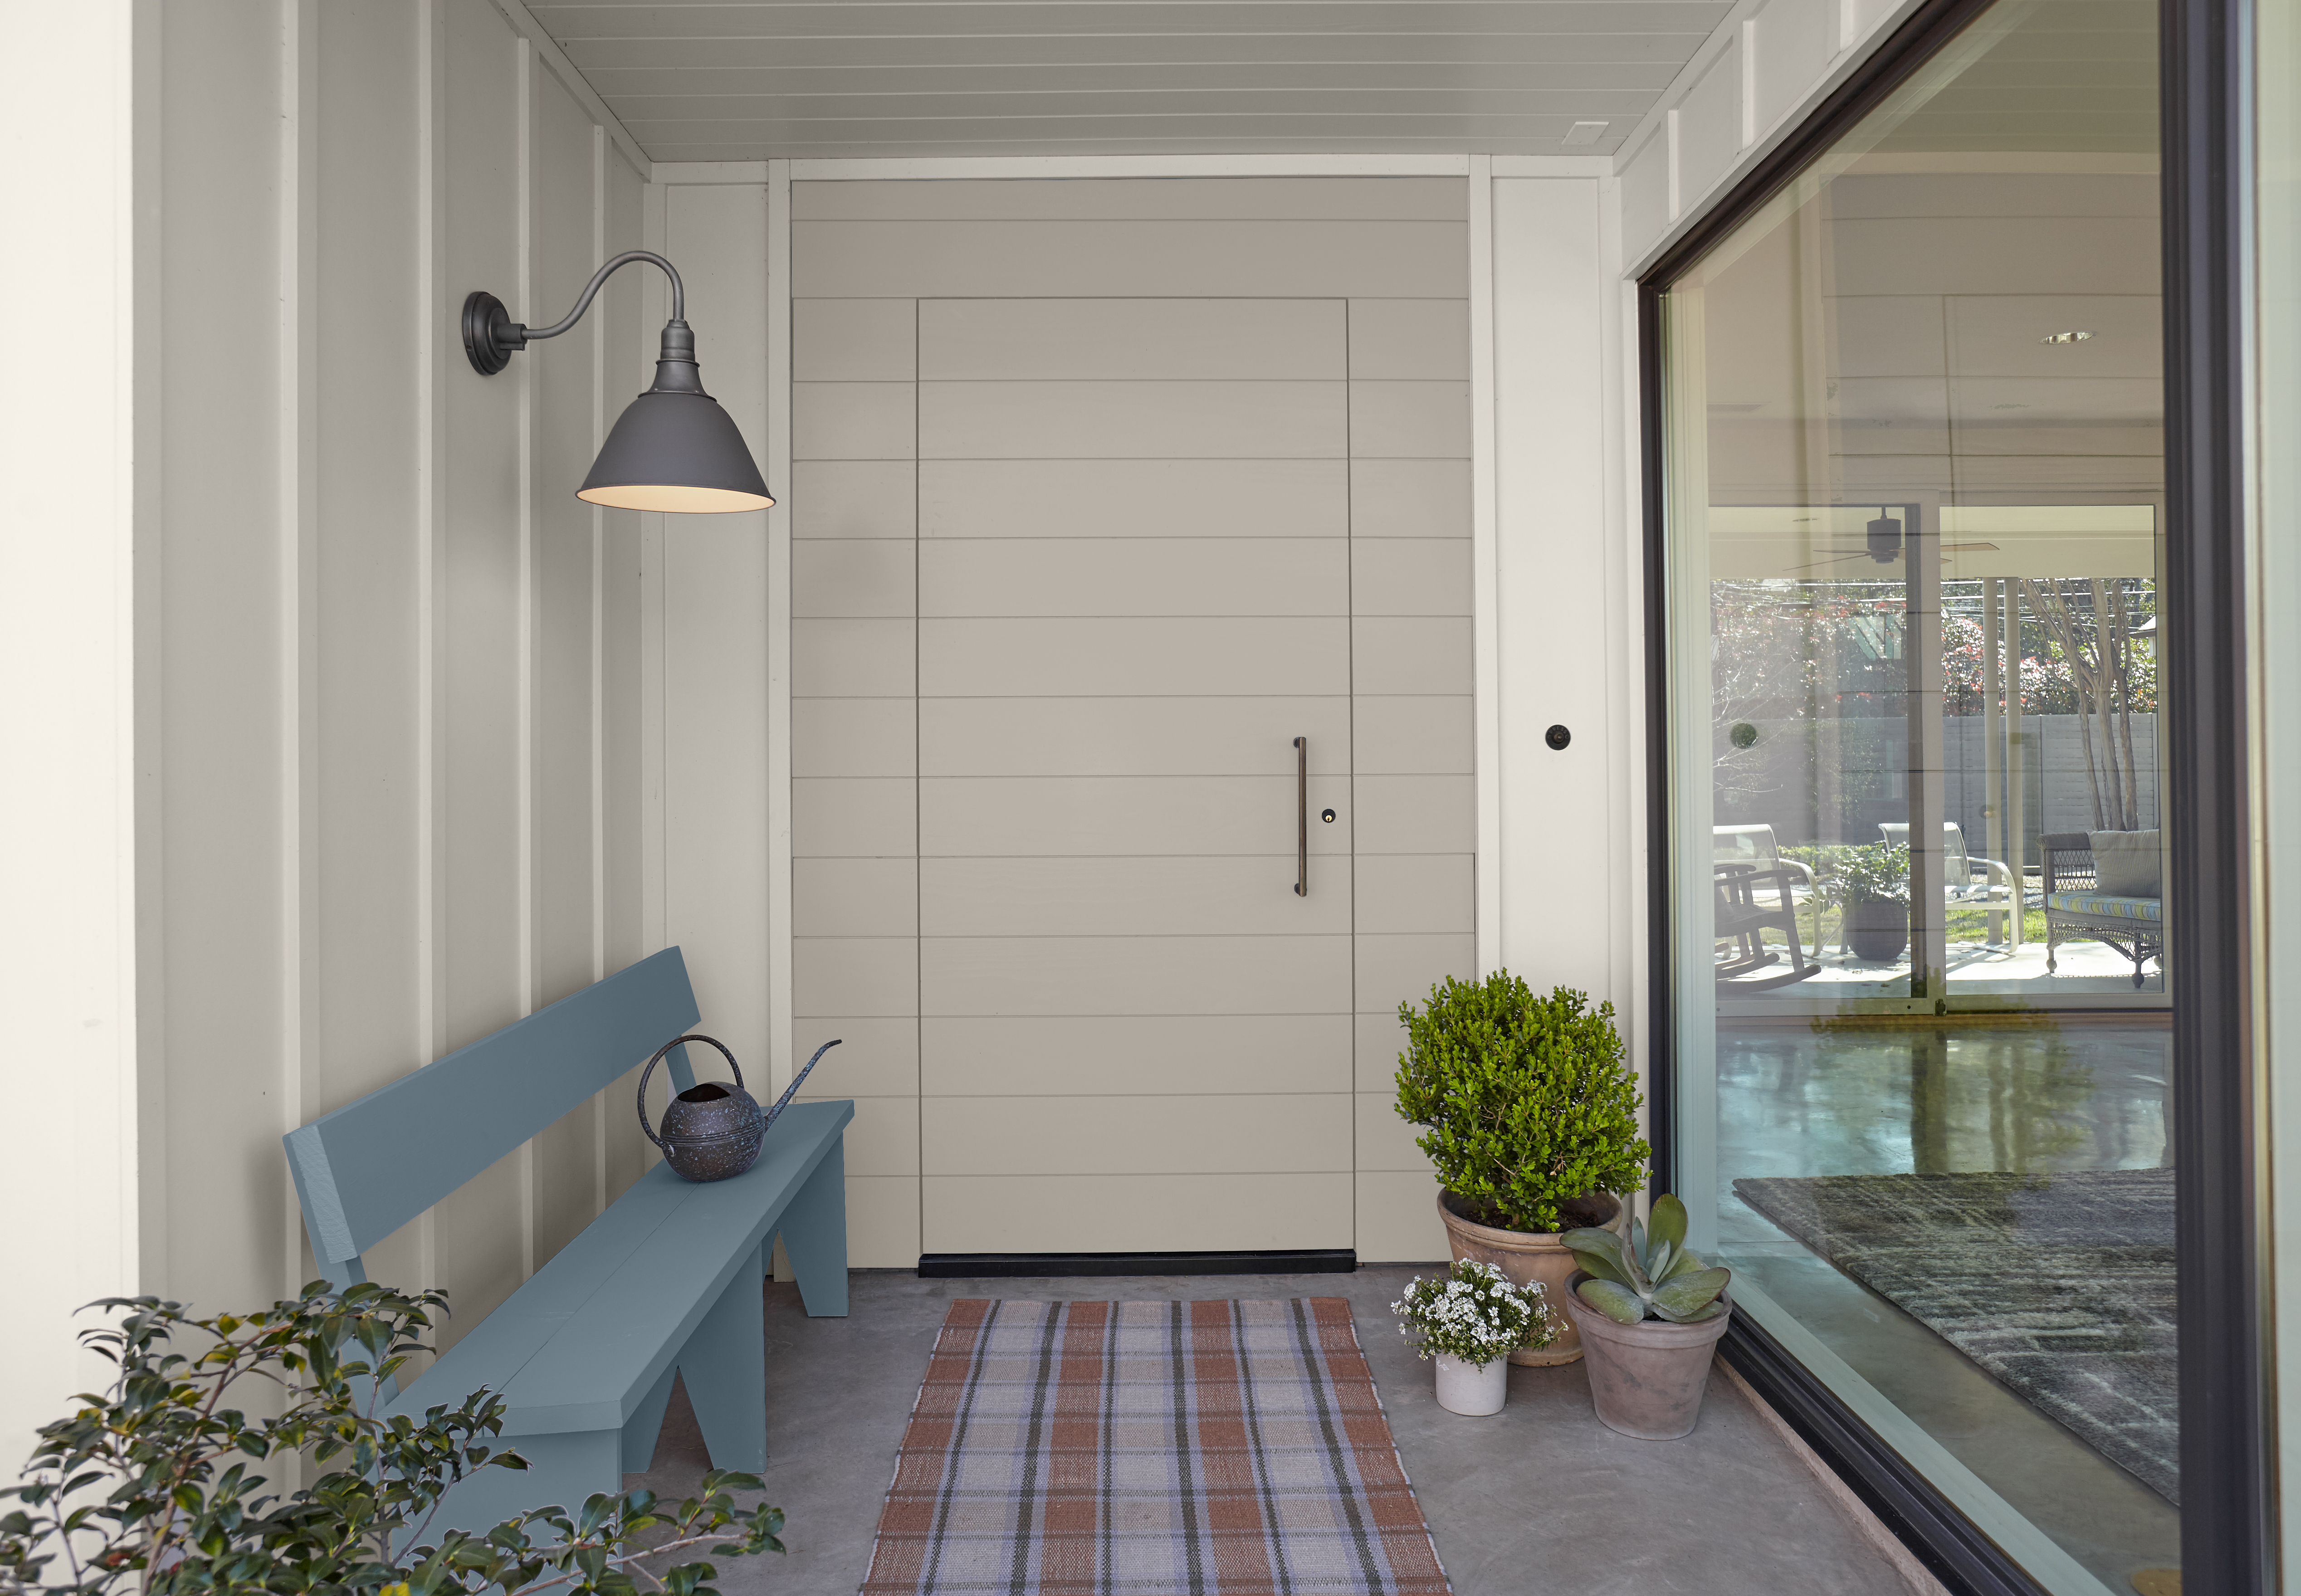 An outdoor entryway with walls painted in a light greige colour and a modern door in a darker greige colour, styled with a bench painted in blue